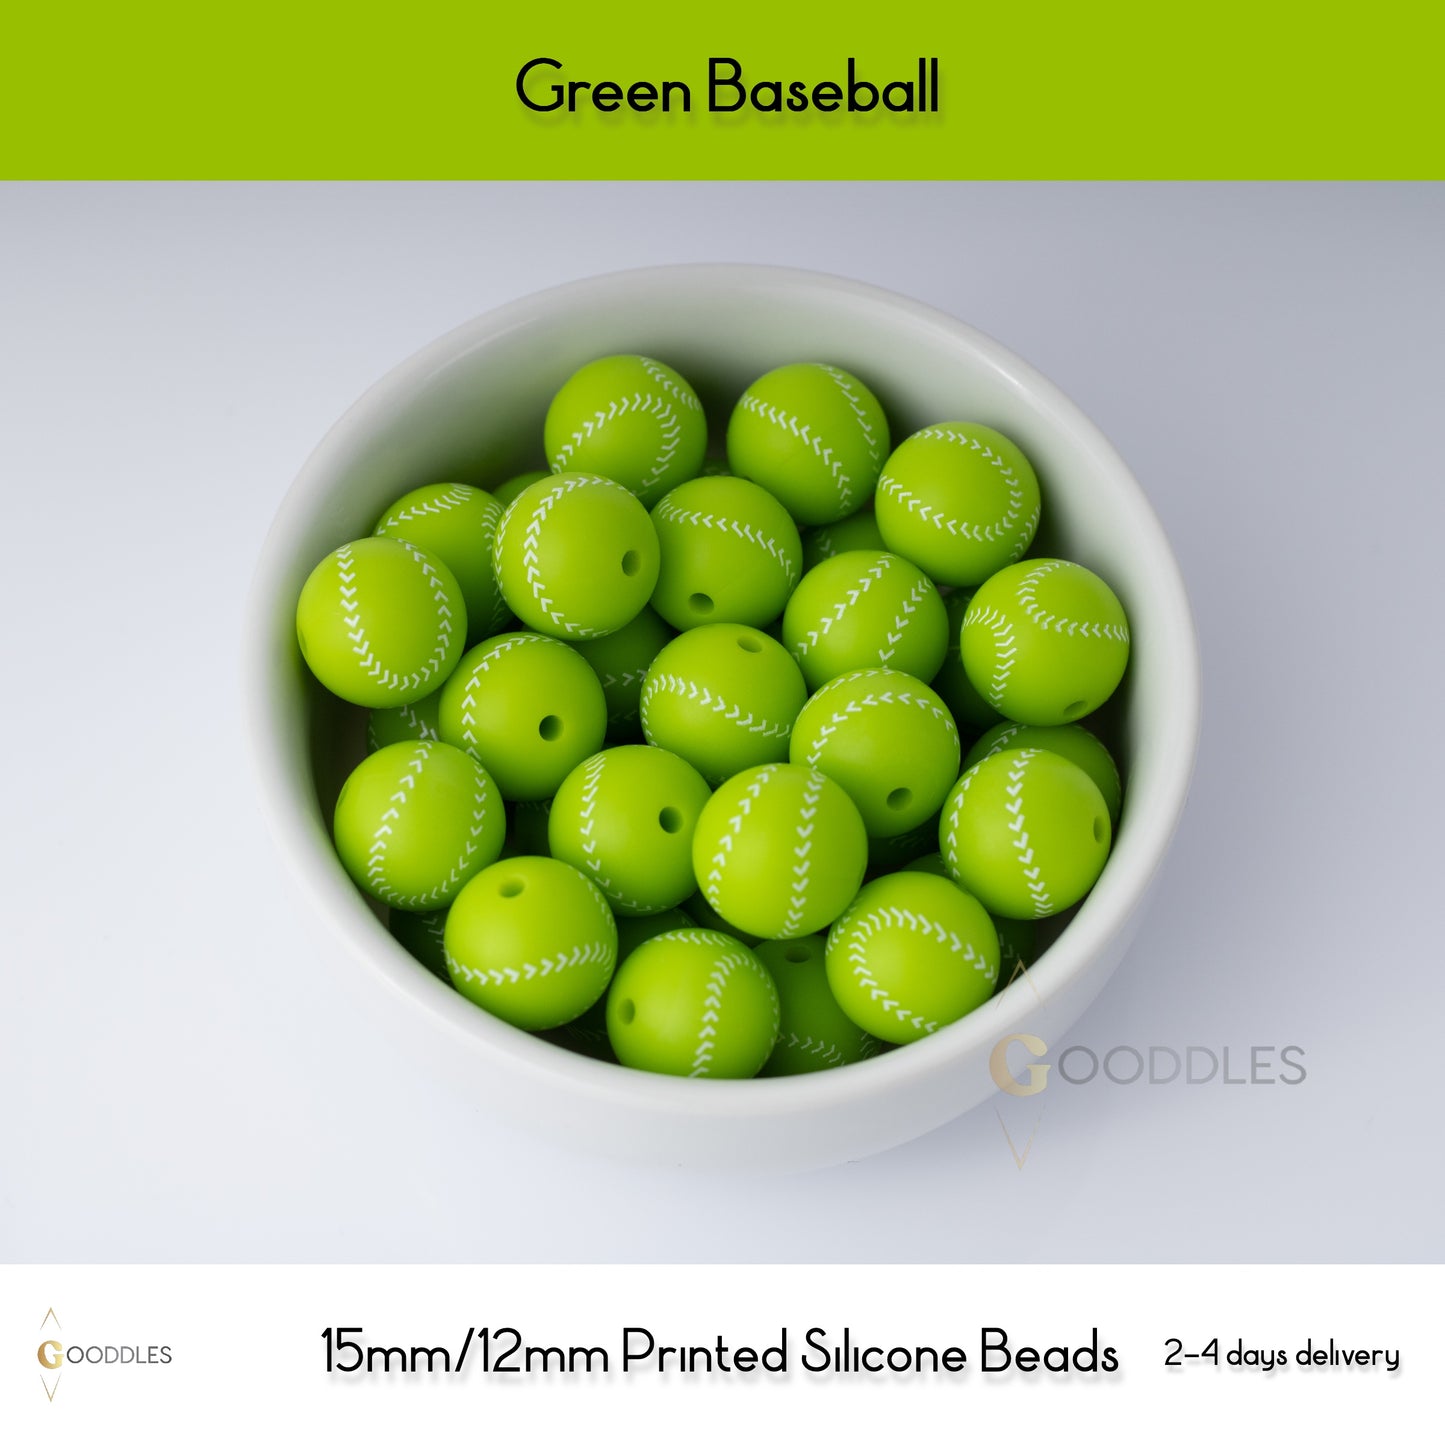 5pcs, Green Baseball Silicone Beads Printed Round Silicone Beads